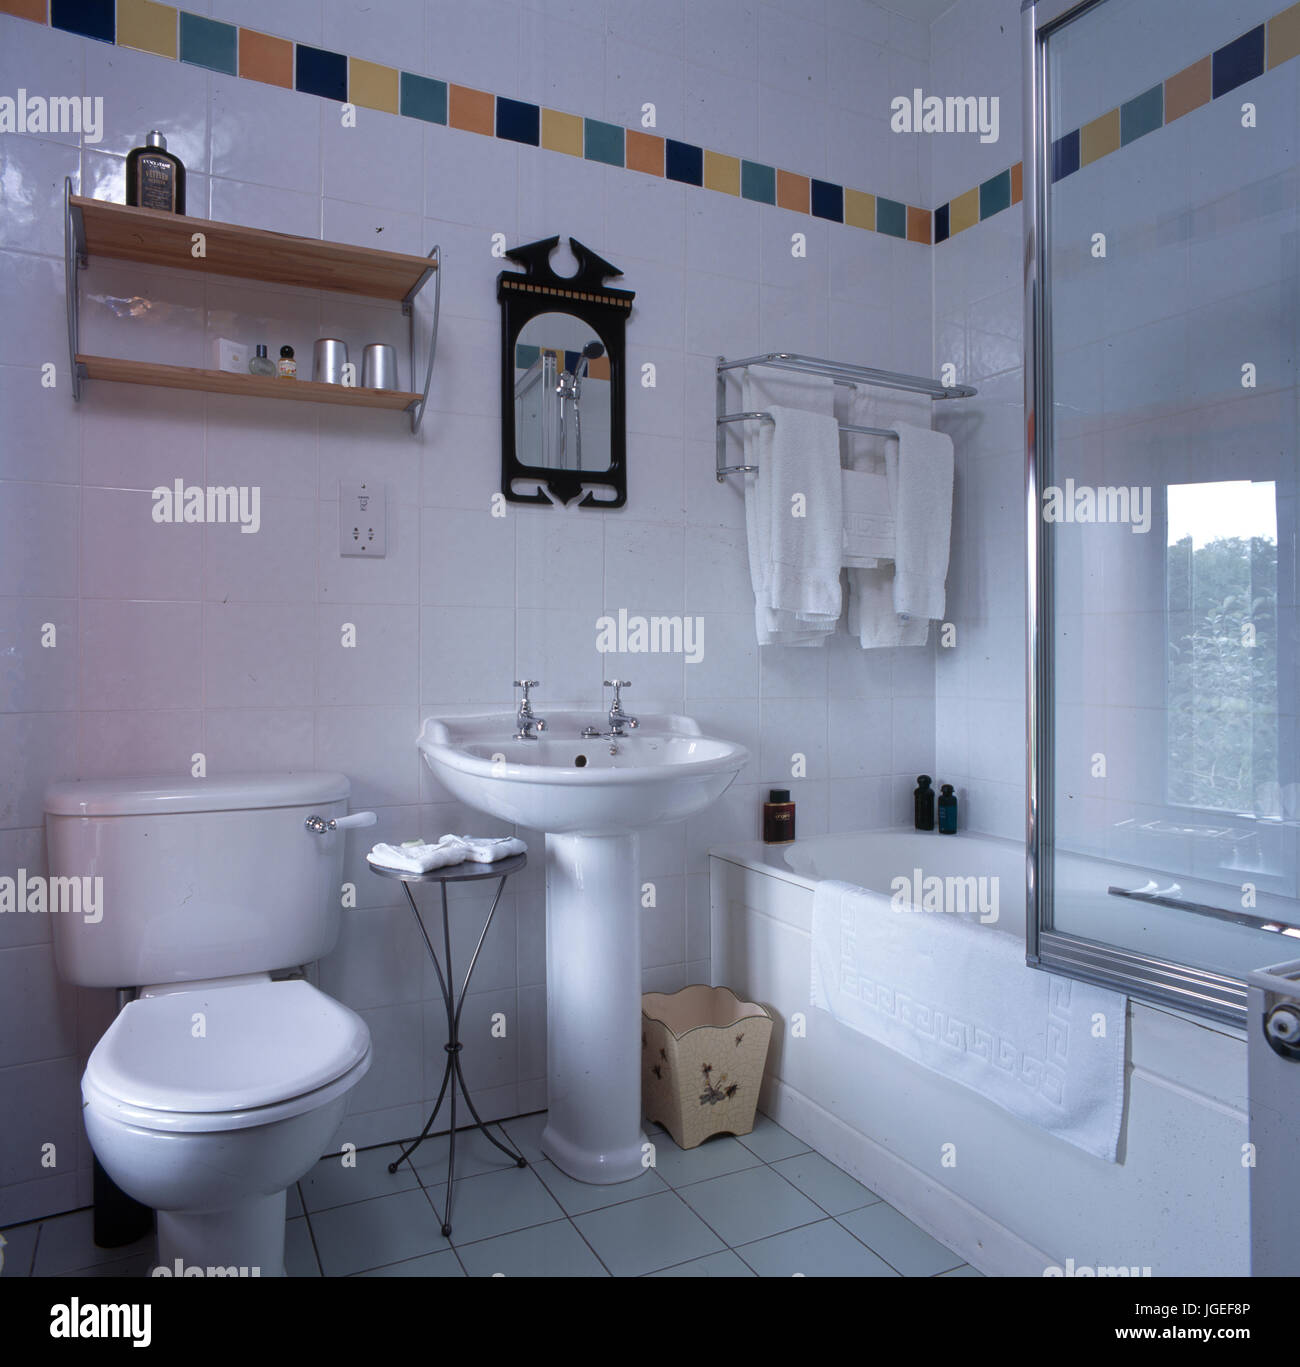 White Tiled Bathroom With Band Of Coloured Tiles At Ceiling Height